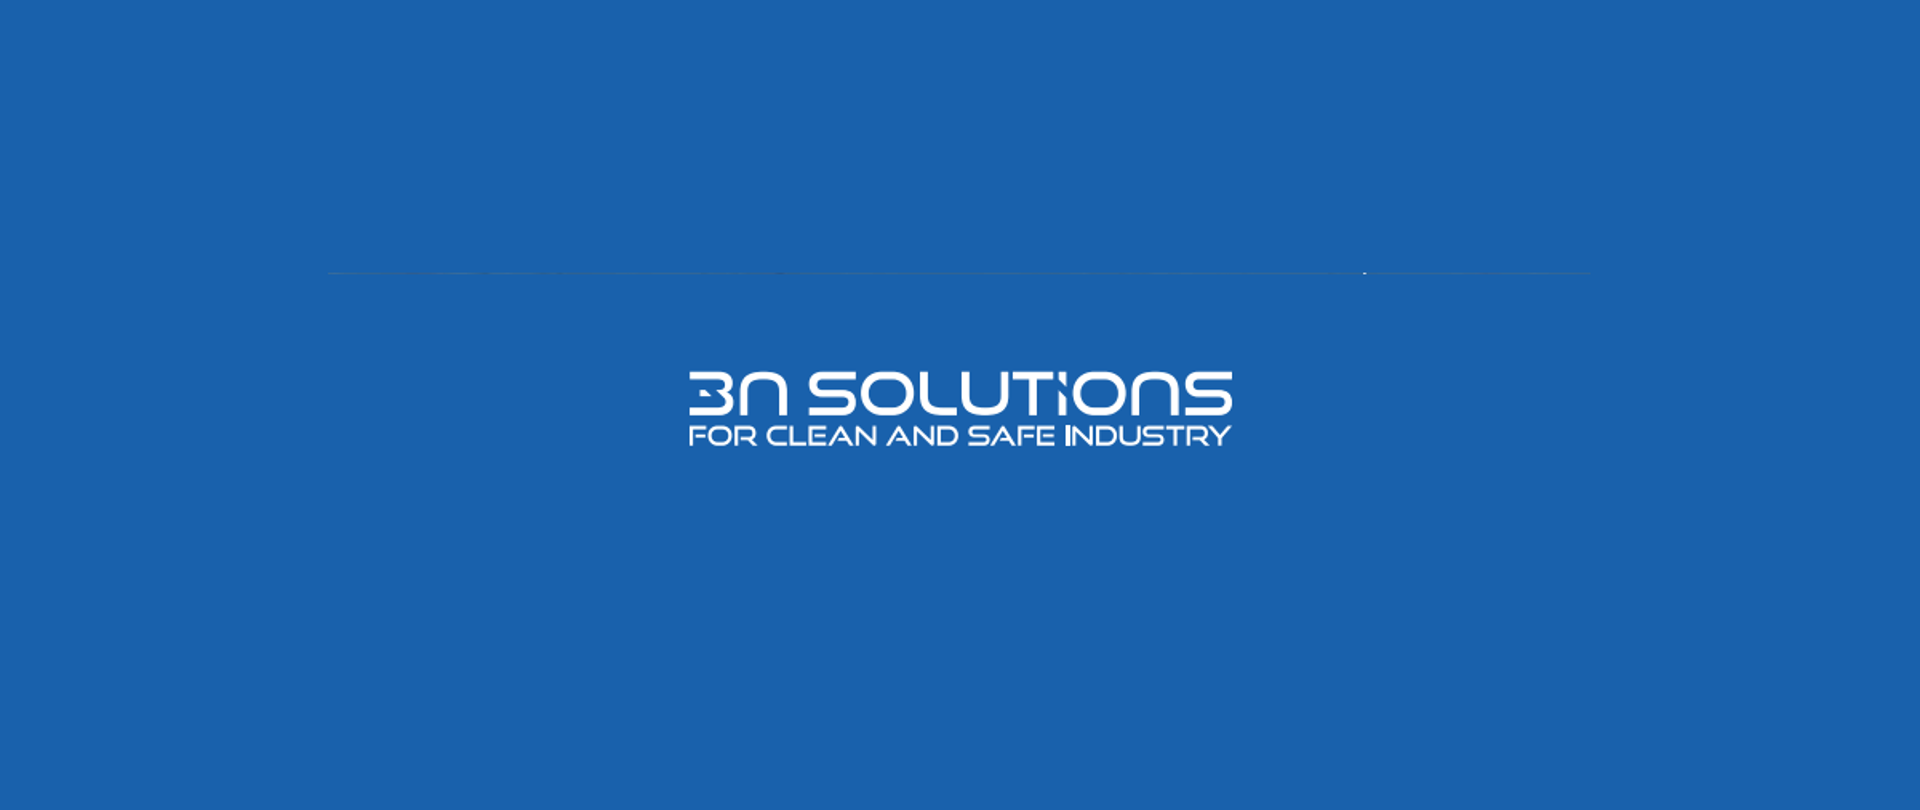 3n Solutions For Clean and Safe Industry